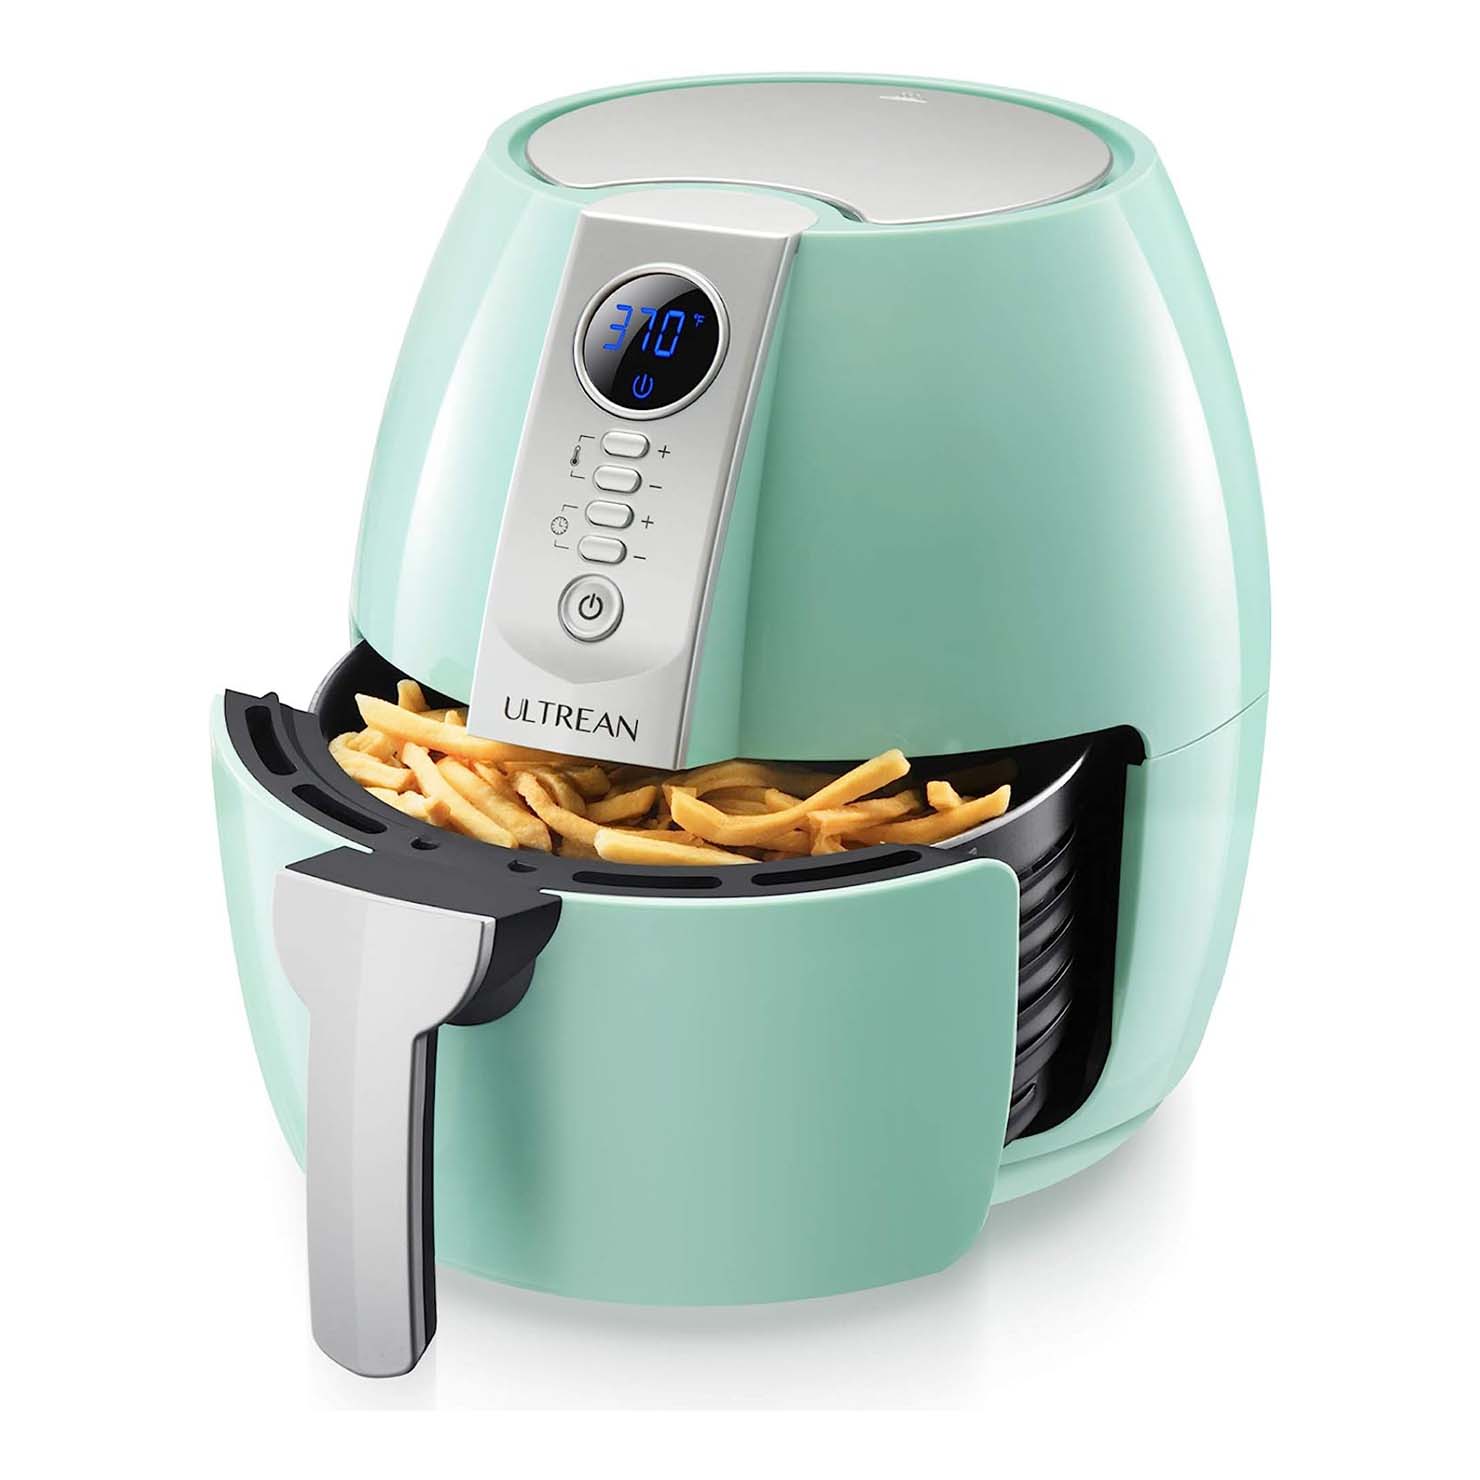 Ultrean Quart Air Fryer with removable basket in mint green